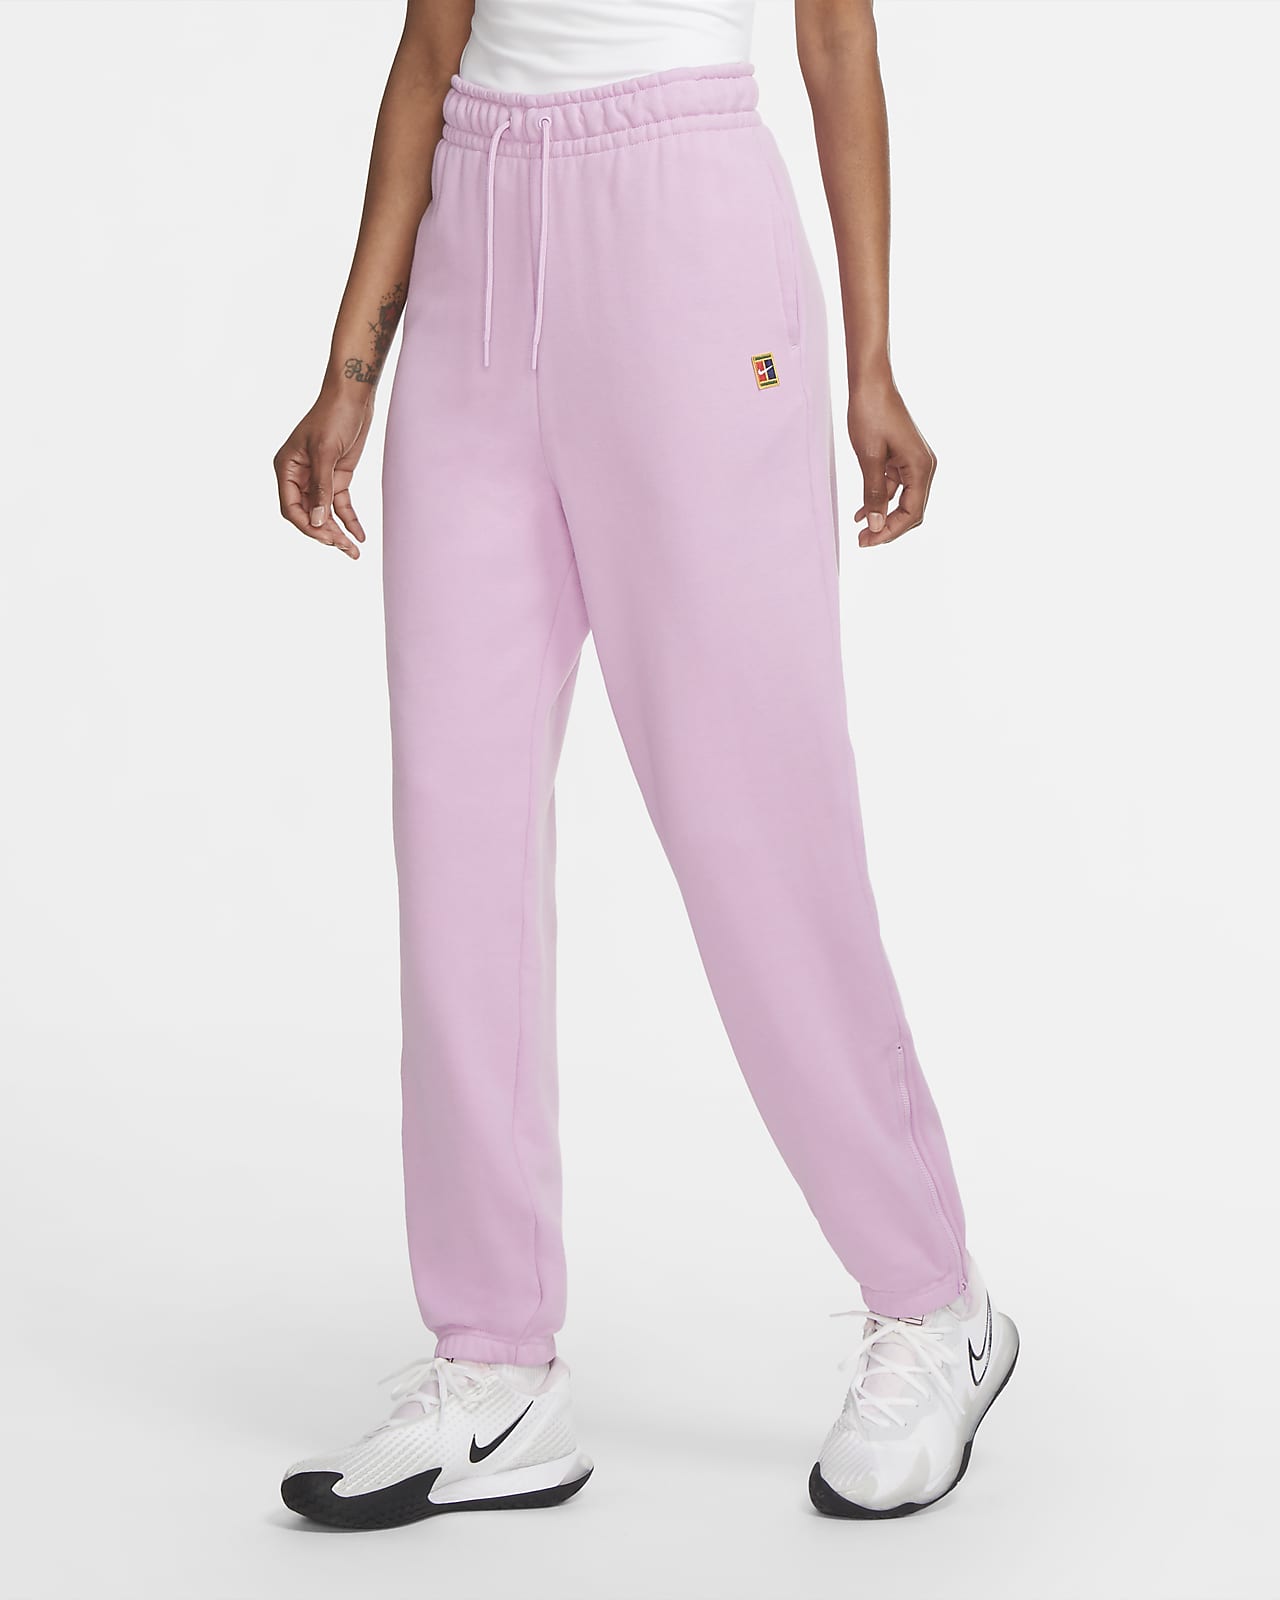 nike pink trousers